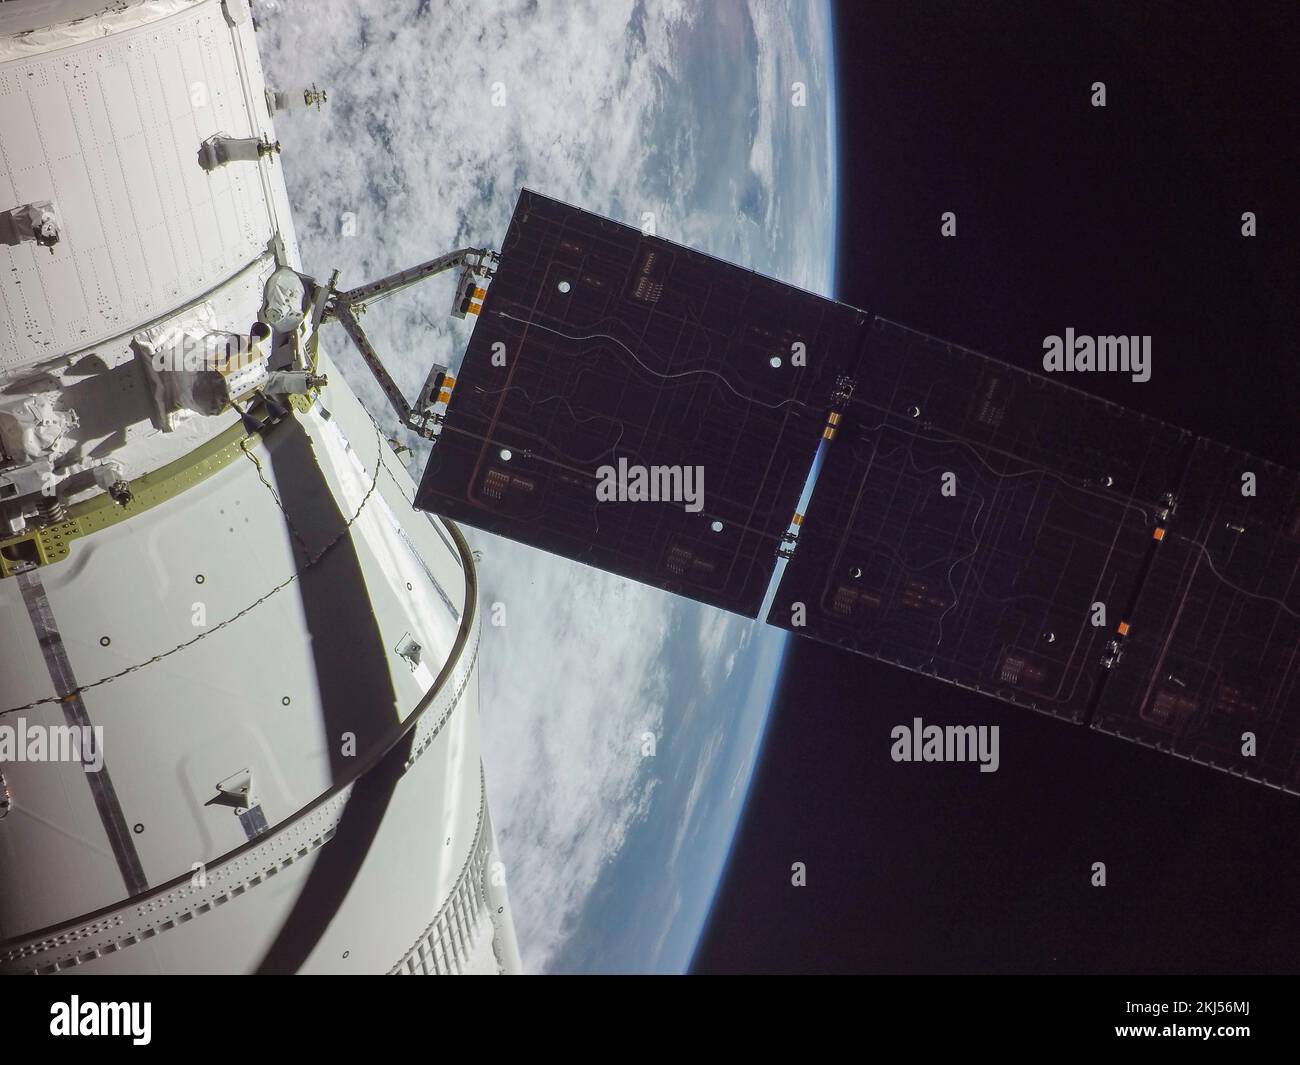 Earth Orbit, Earth Orbit. 16 November, 2022. Selfie of the Orion crew capsule with the Earth after deploying one of the solar arrays shortly after launch on flight day one of the NASA Artemis I mission, November 16, 2022, in Earth Orbit. The image was captured by a camera on the tip of one of the solar arrays as it traveled out of the Earth’s atmosphere.  Credit: NASA/NASA/Alamy Live News Stock Photo